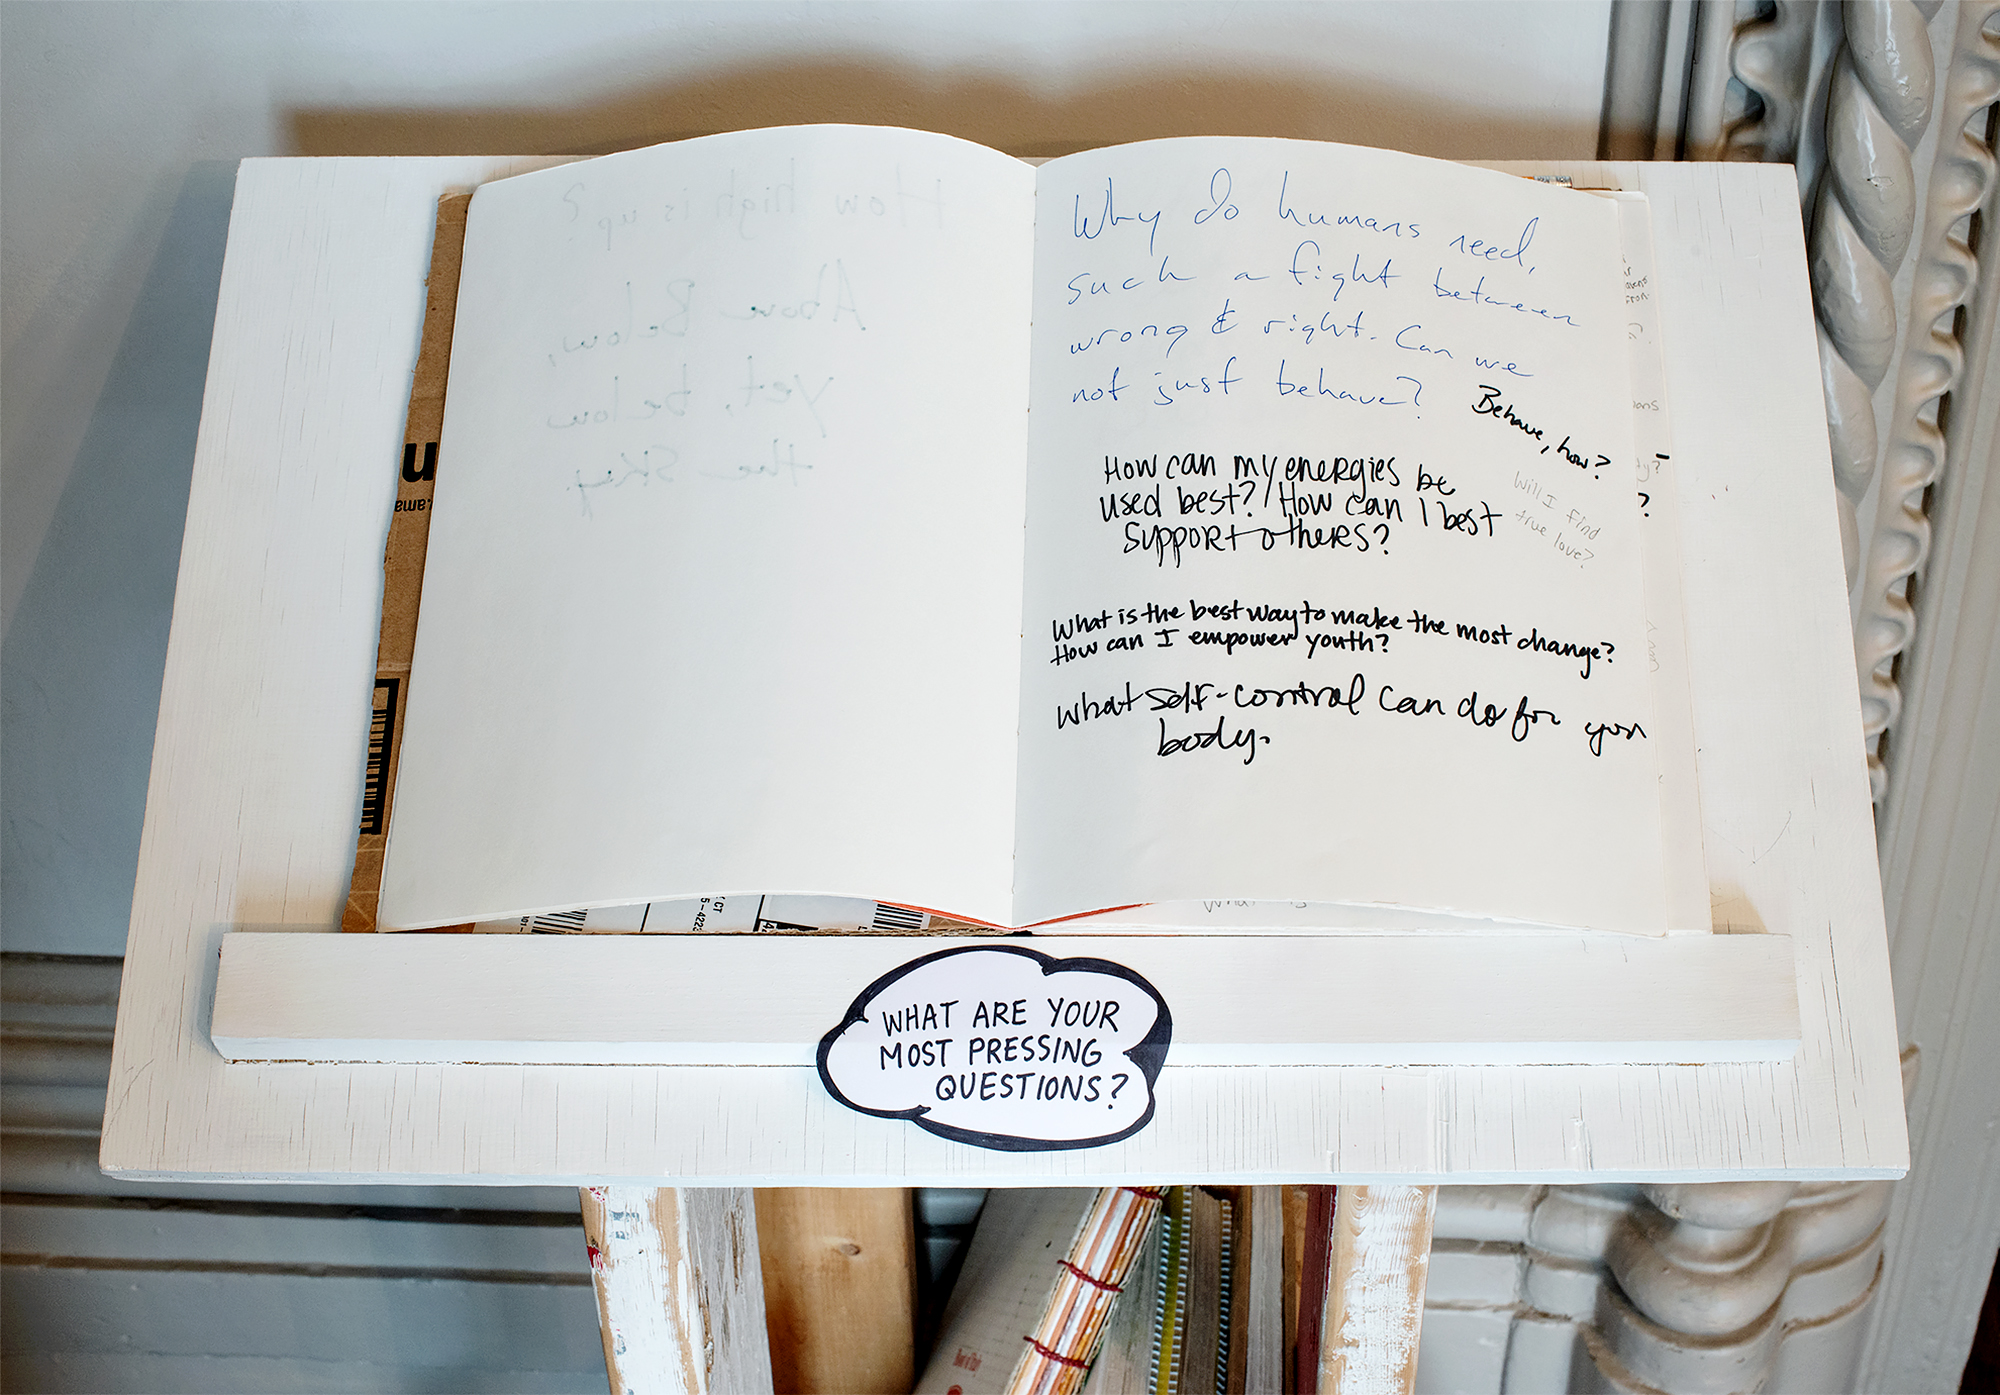 Image: Detail view of a book and prompt set on one of the mobile pedestals in the Everything on Wheels series, placed in one of the downstairs rooms at Hull-House. The prompt says “what are your most pressing questions?”, and people have written answers such as “How can my energies be used best? How can I best support others?”, or “What is the best way to make the most change? How can I empower youth?” Photo by Greg Ruffing.